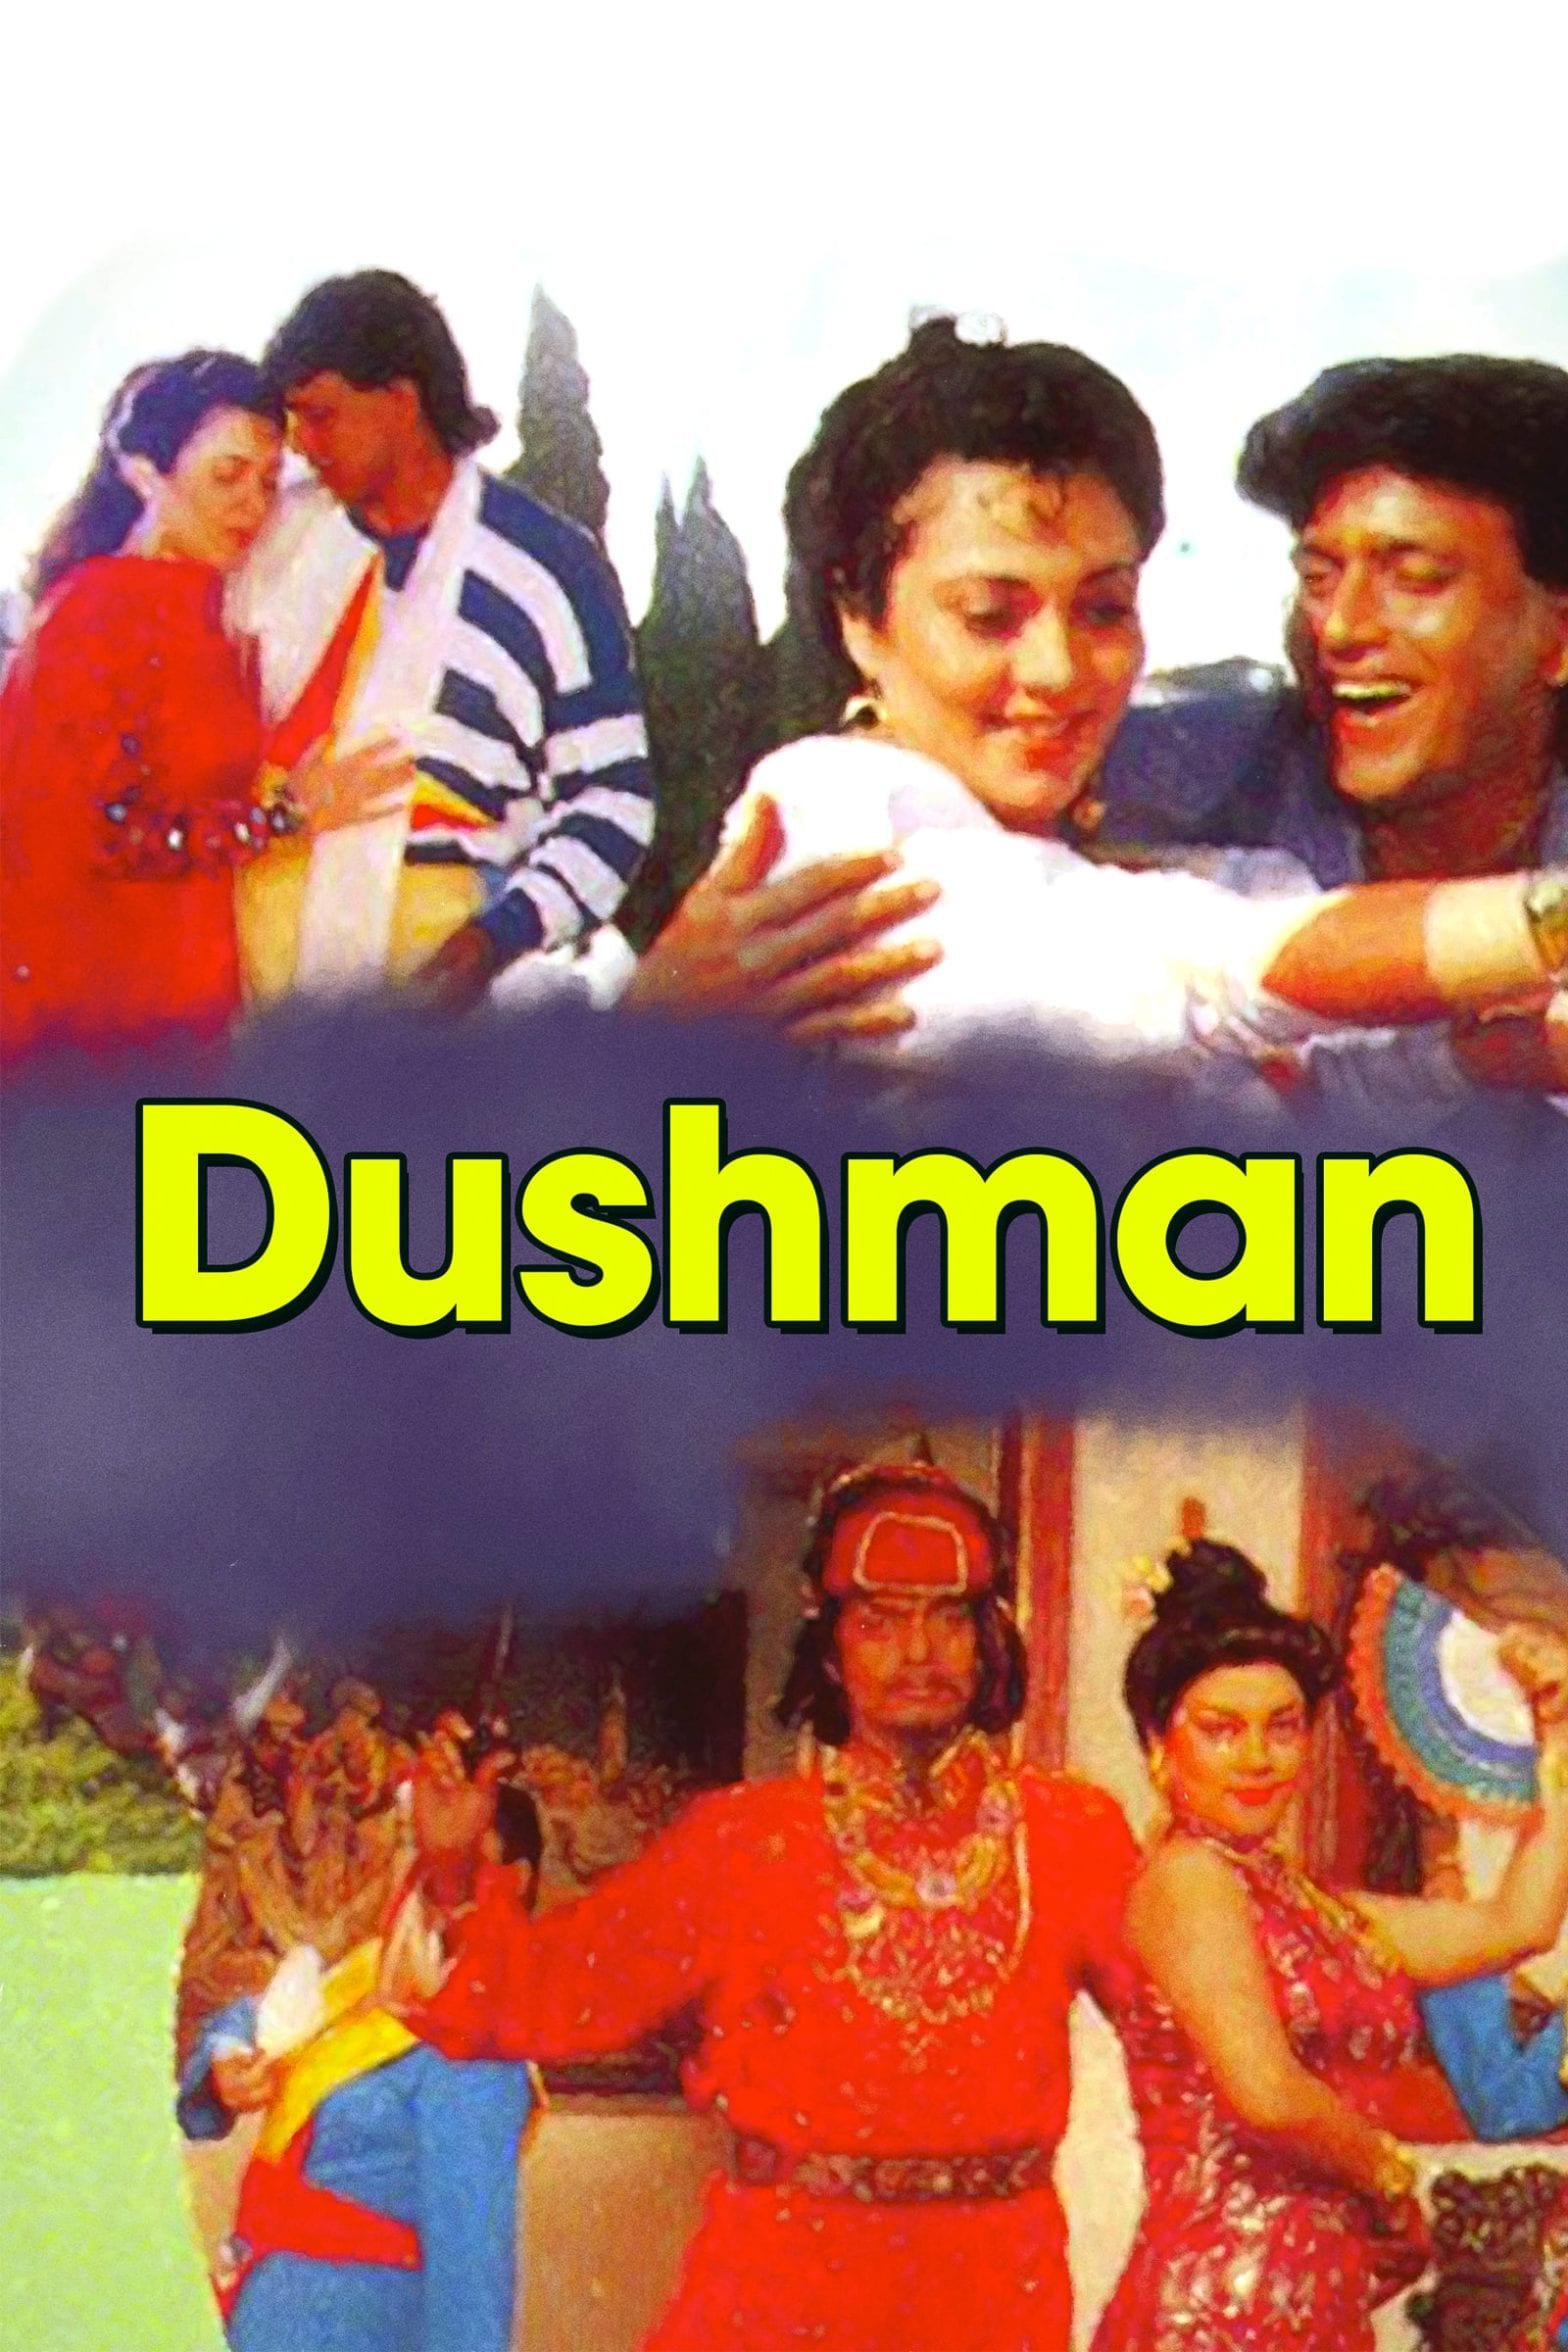 Poster for the movie "Dushman"